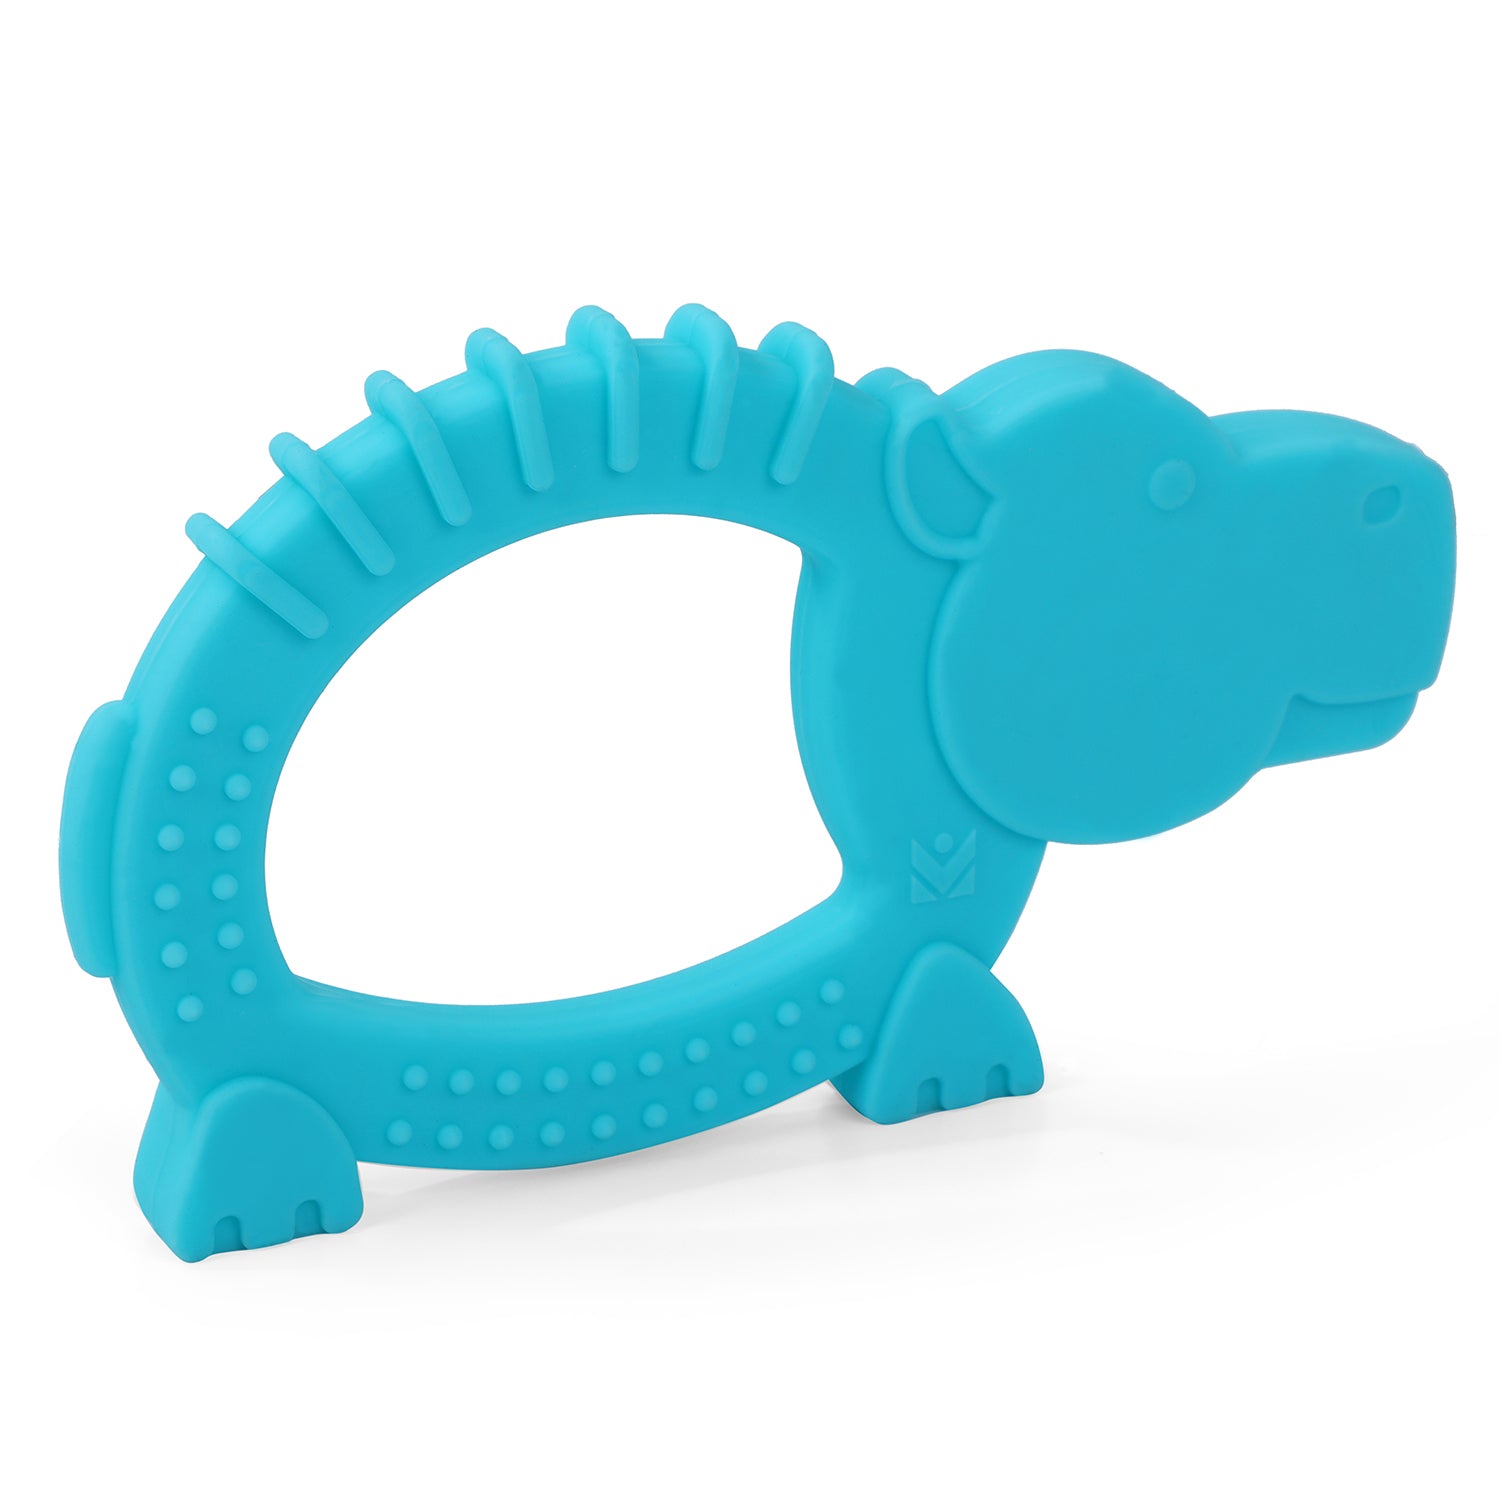 Baby Moo Hippo Soothing Silicon Teether BPA And Toxin Free - Blue - Baby Moo